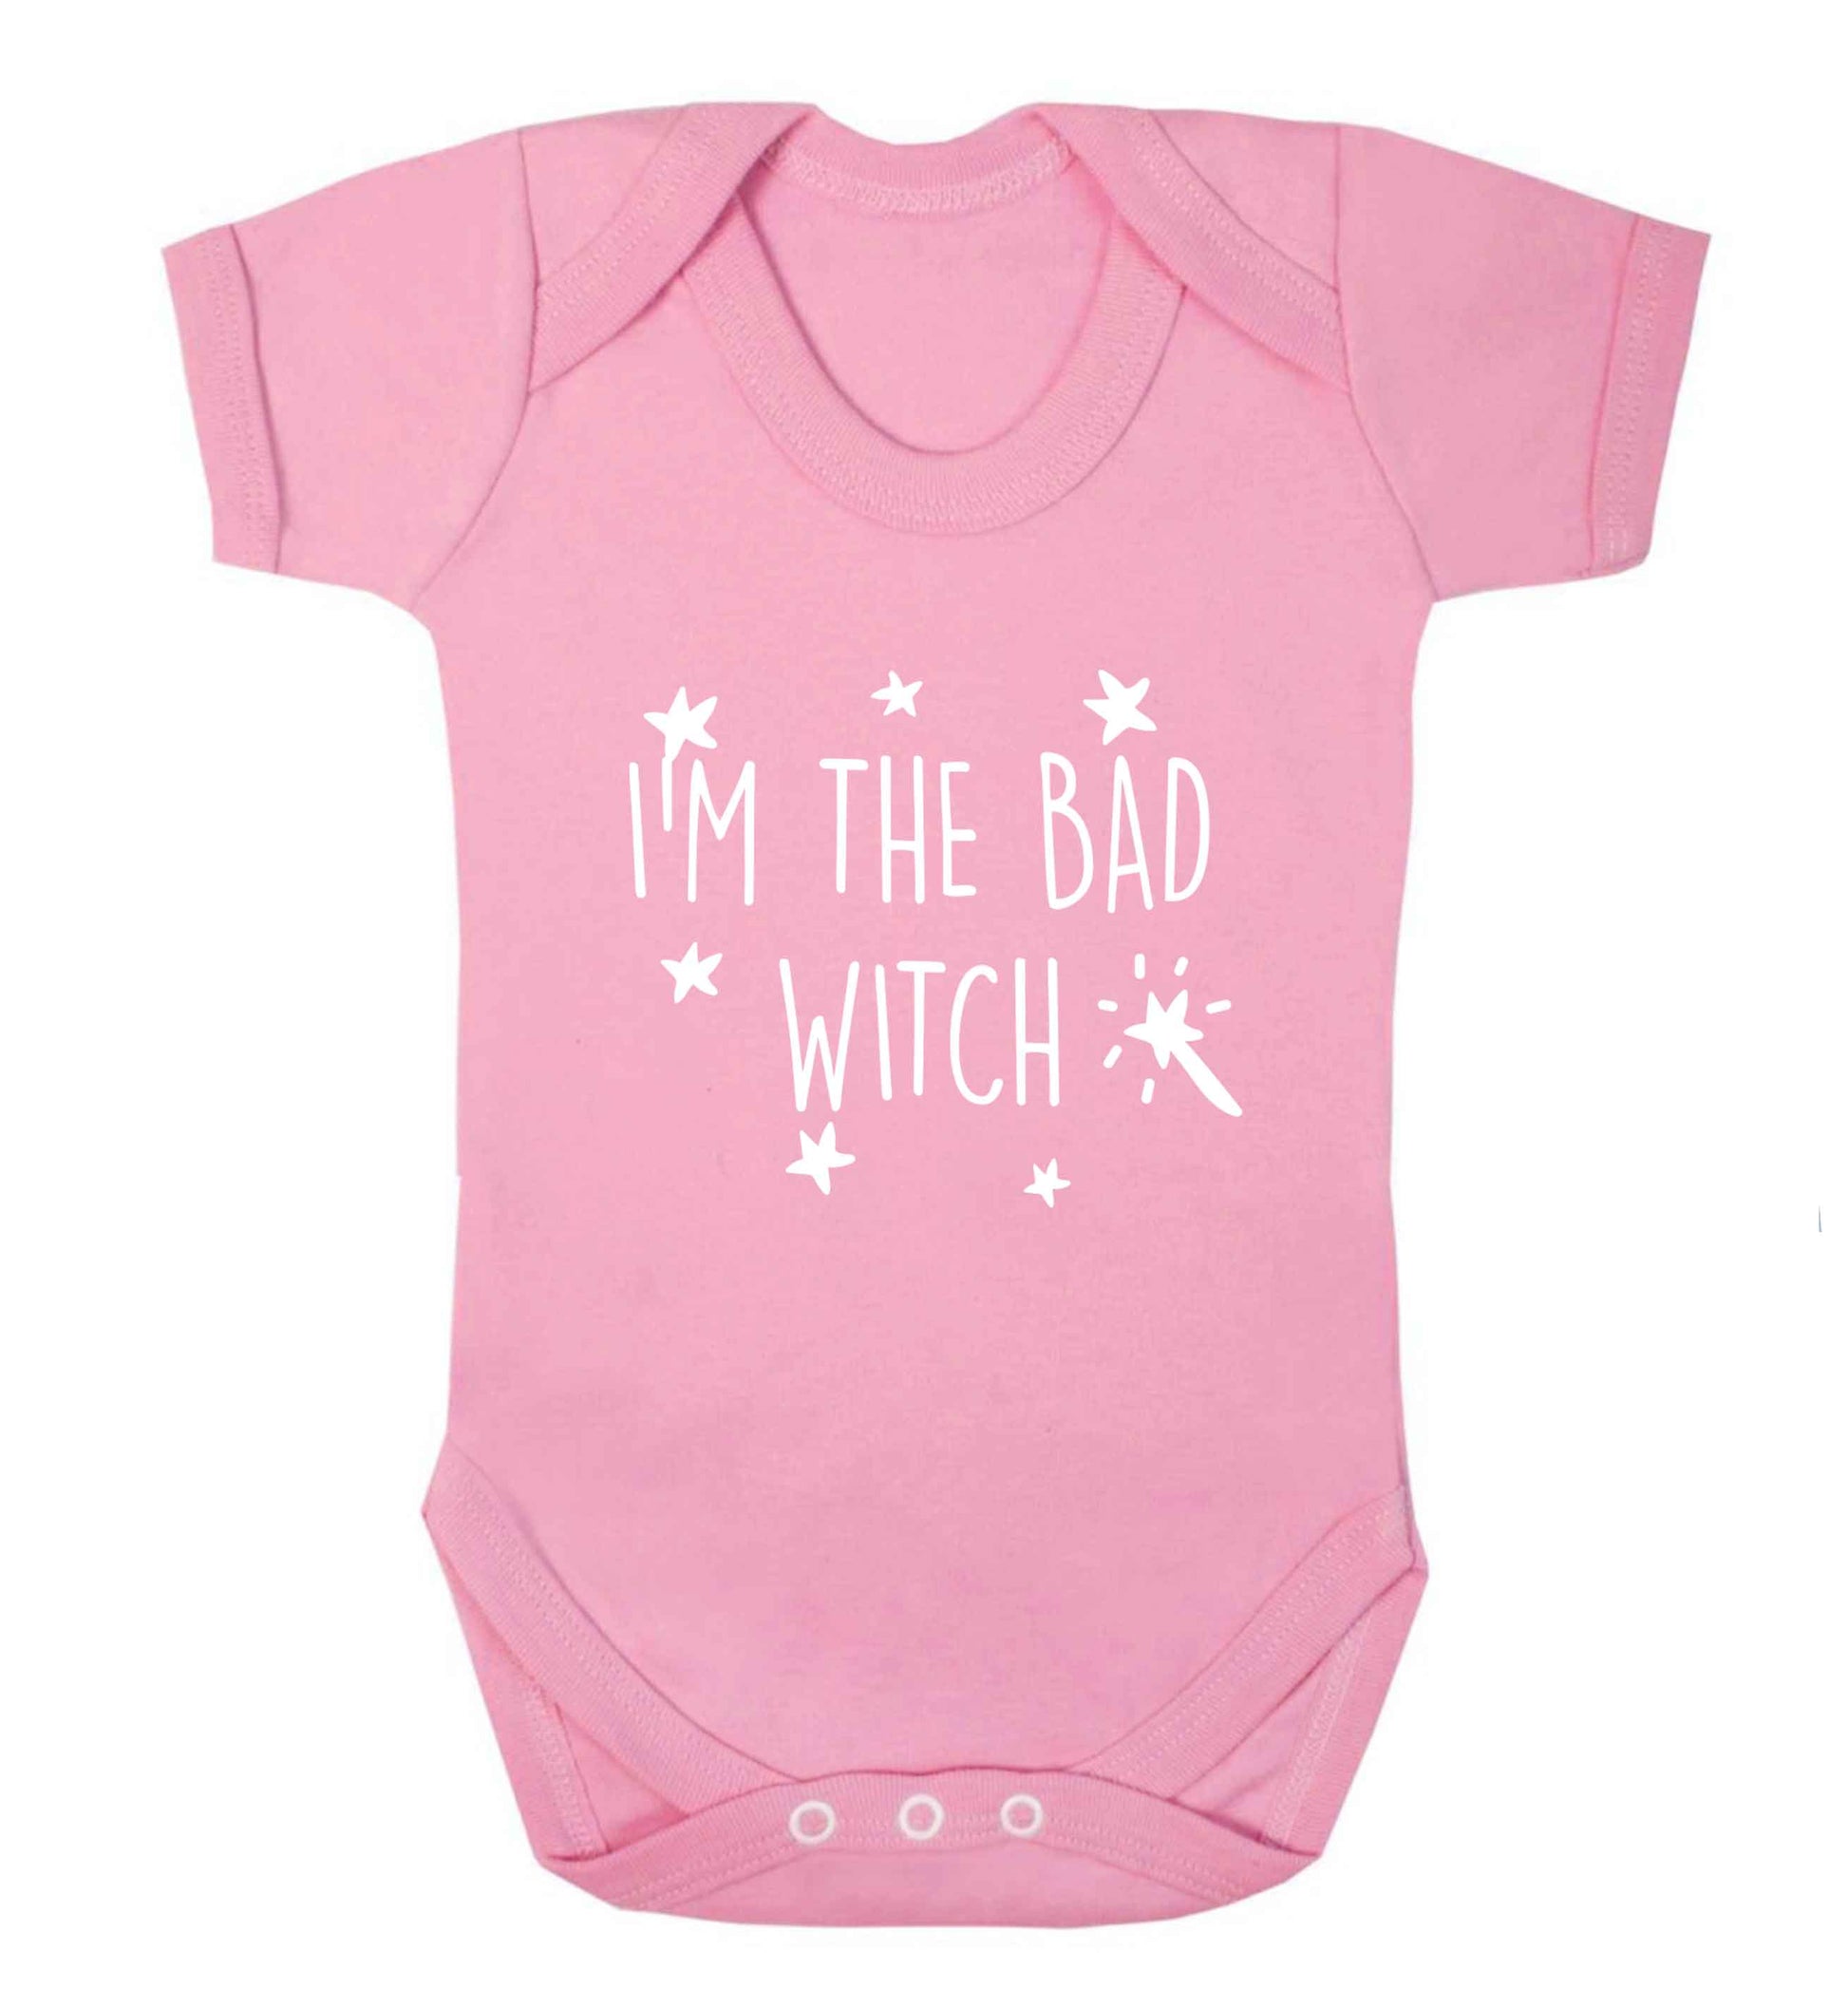 Bad witch baby vest pale pink 18-24 months